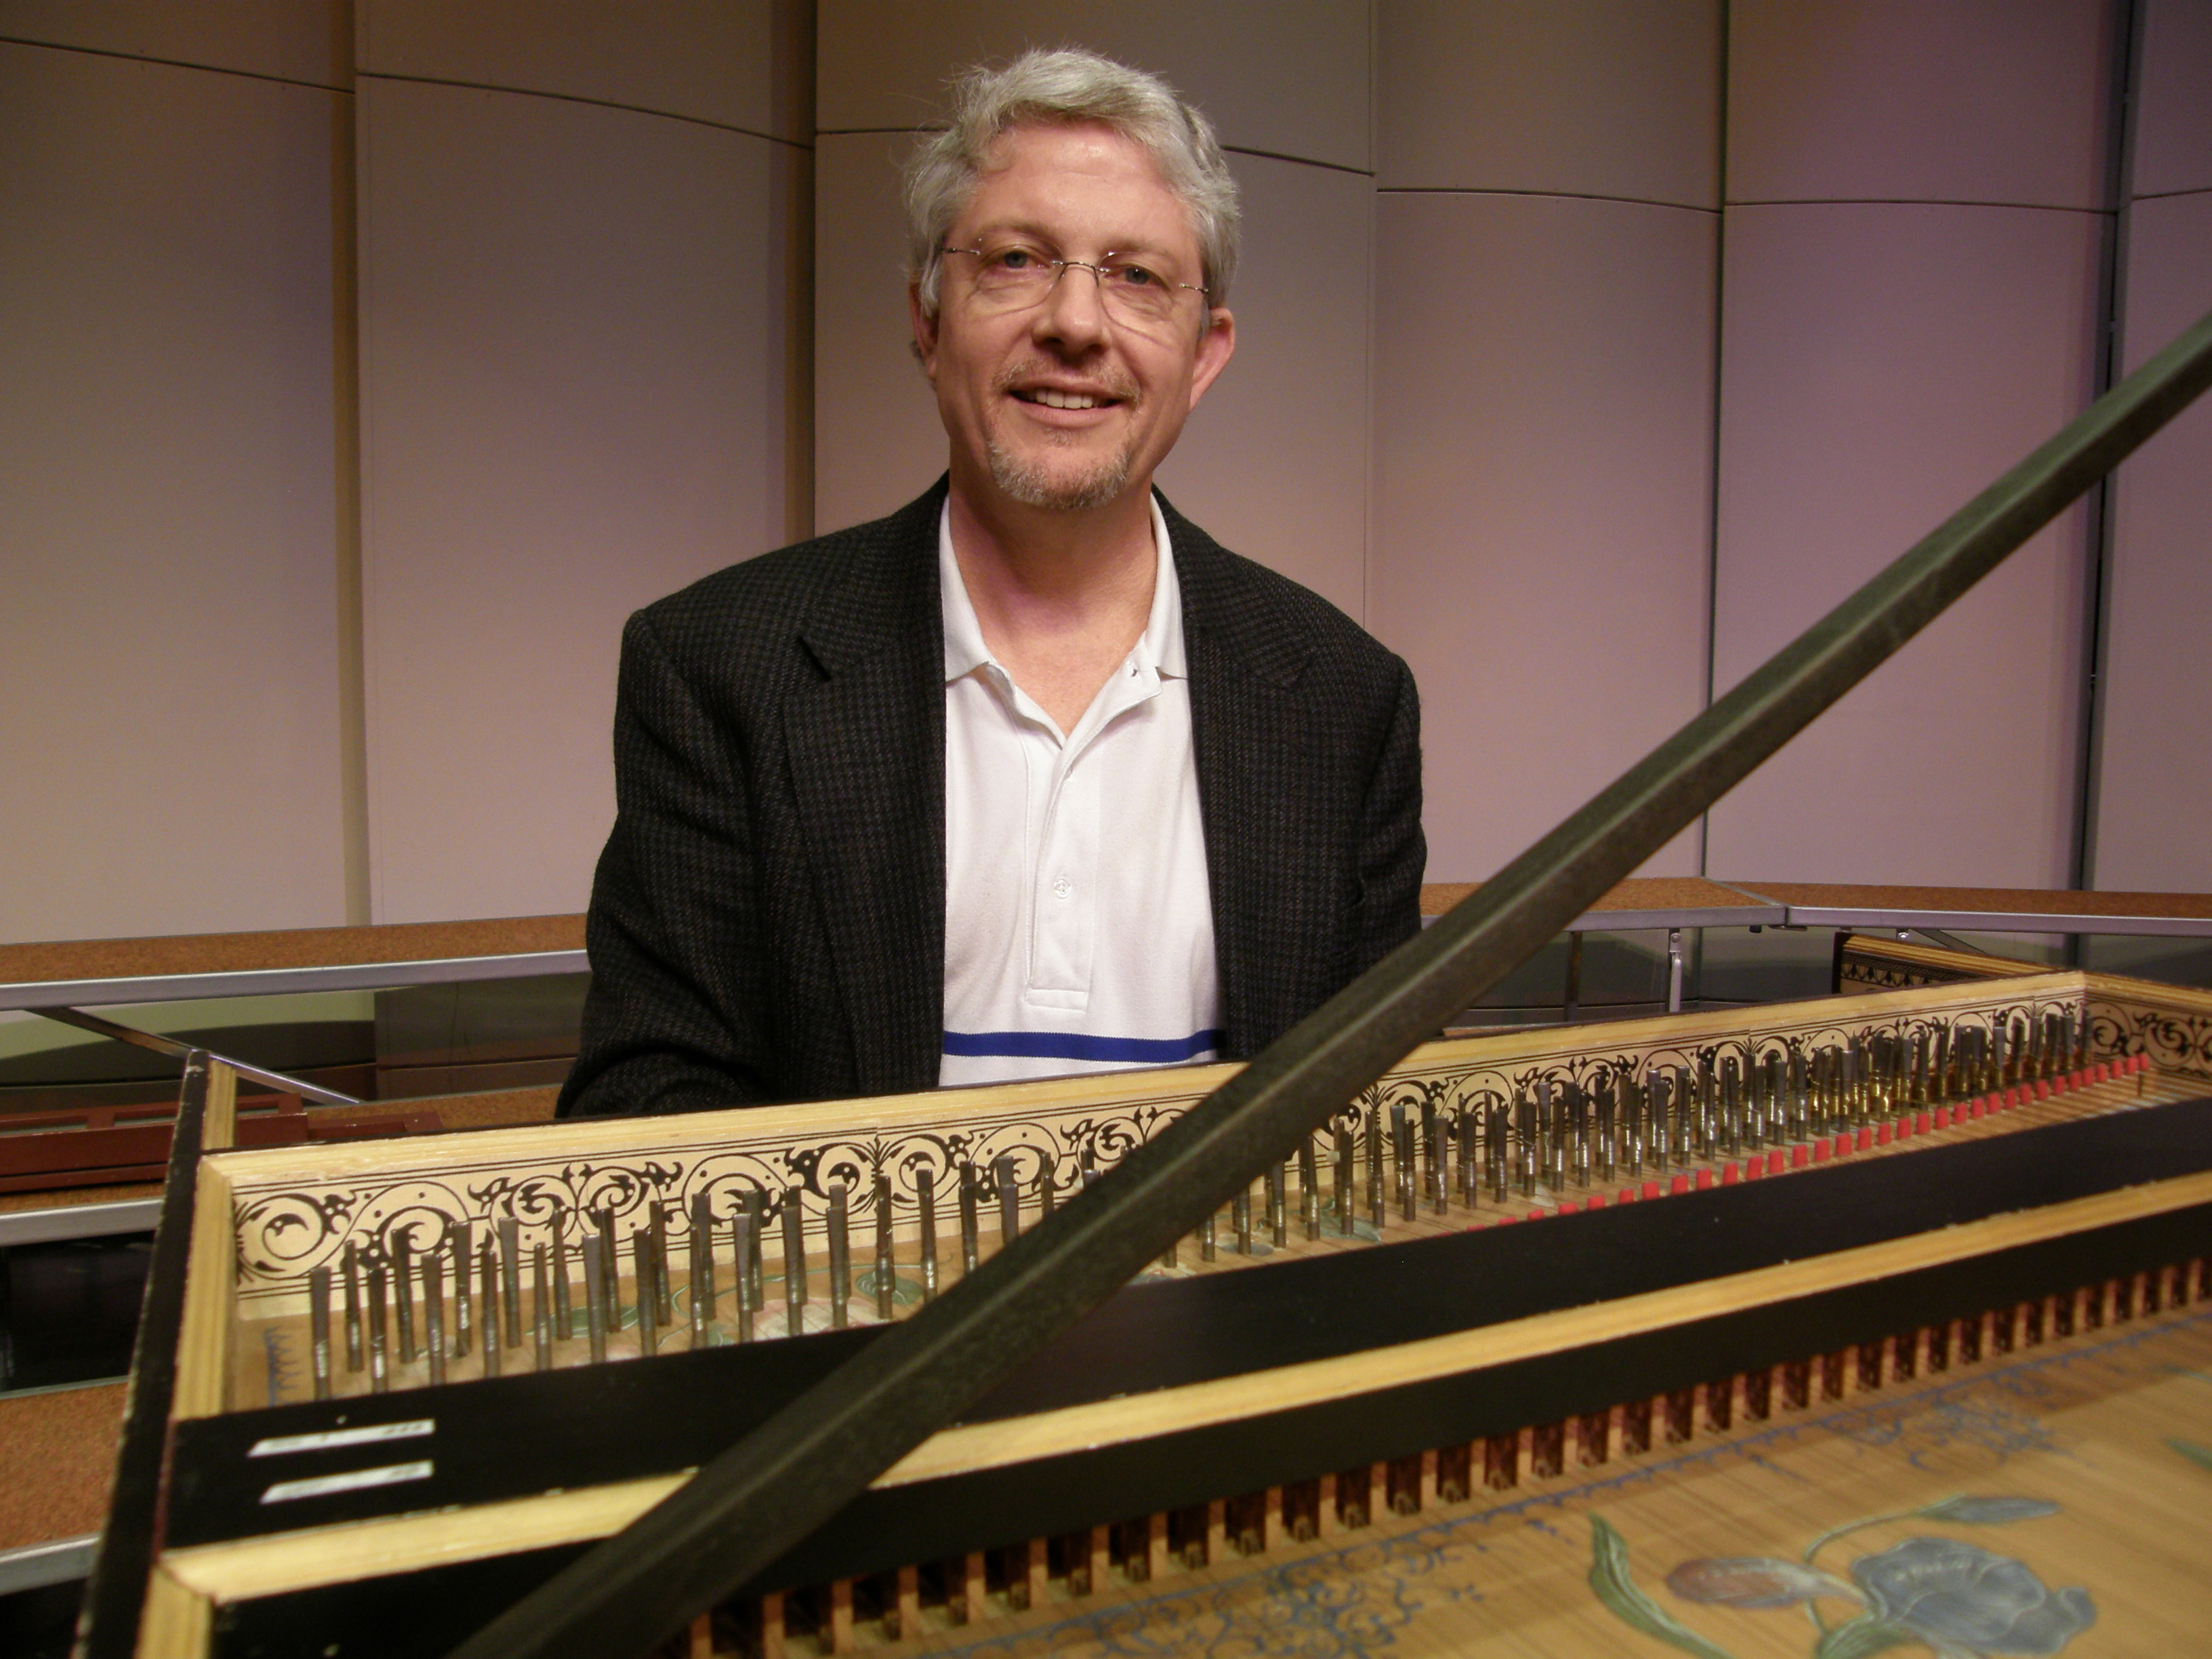 Richard Gard is seen smiling at a photograph, sitting in front of a harpsichord. 